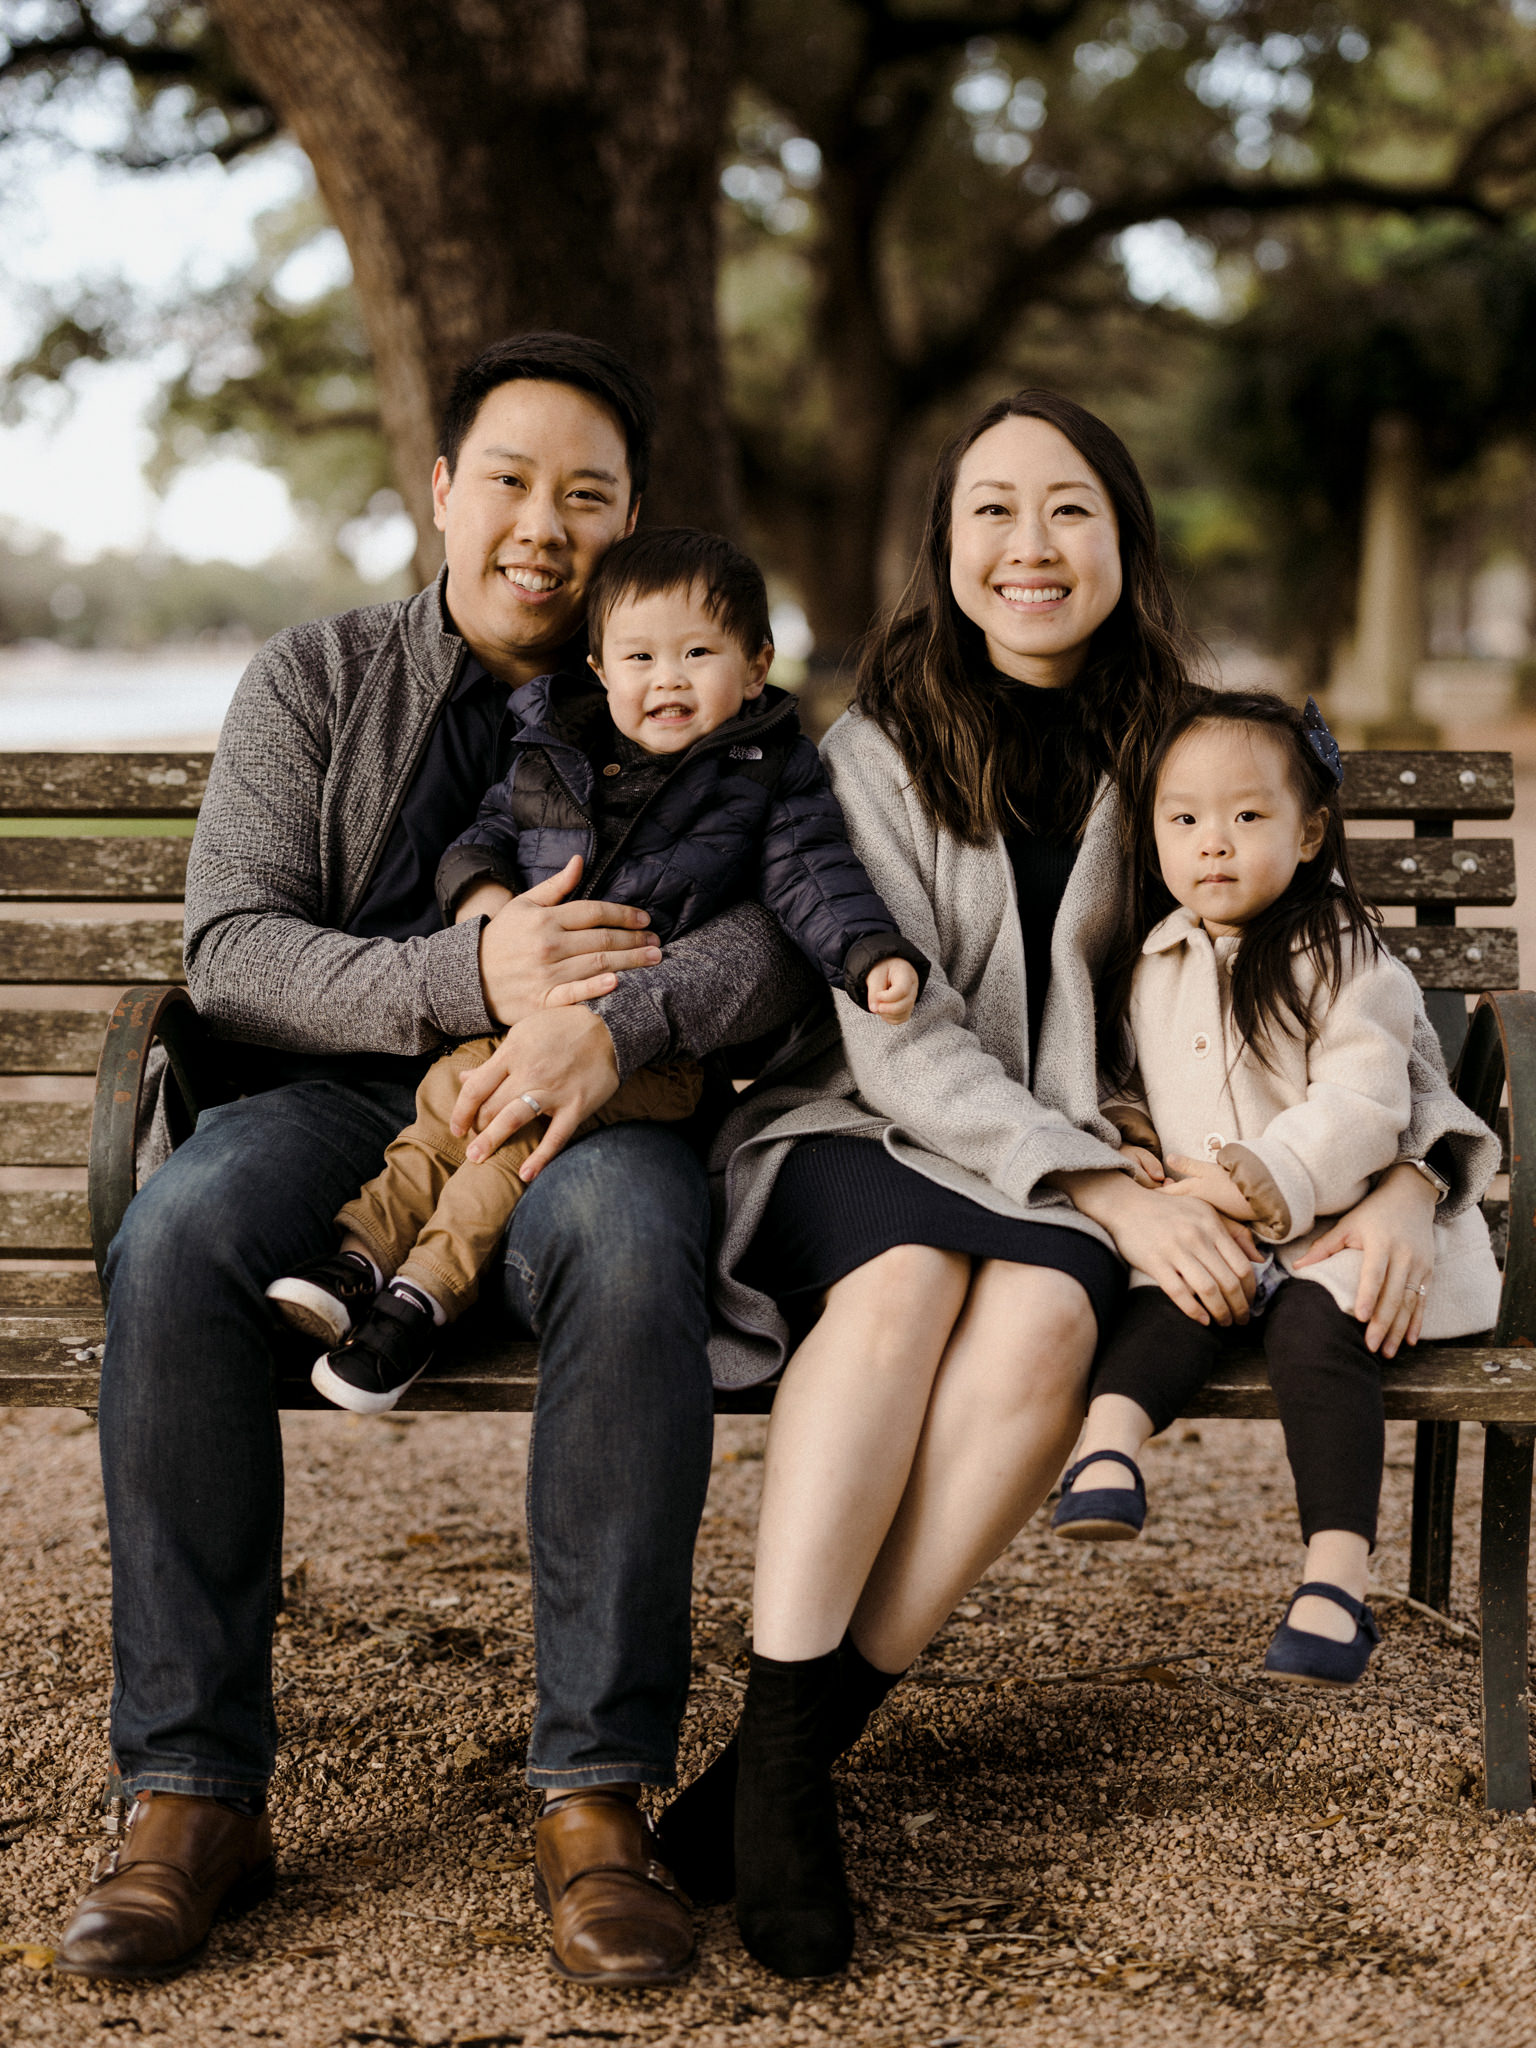 Husband and wife with the children on a park bench